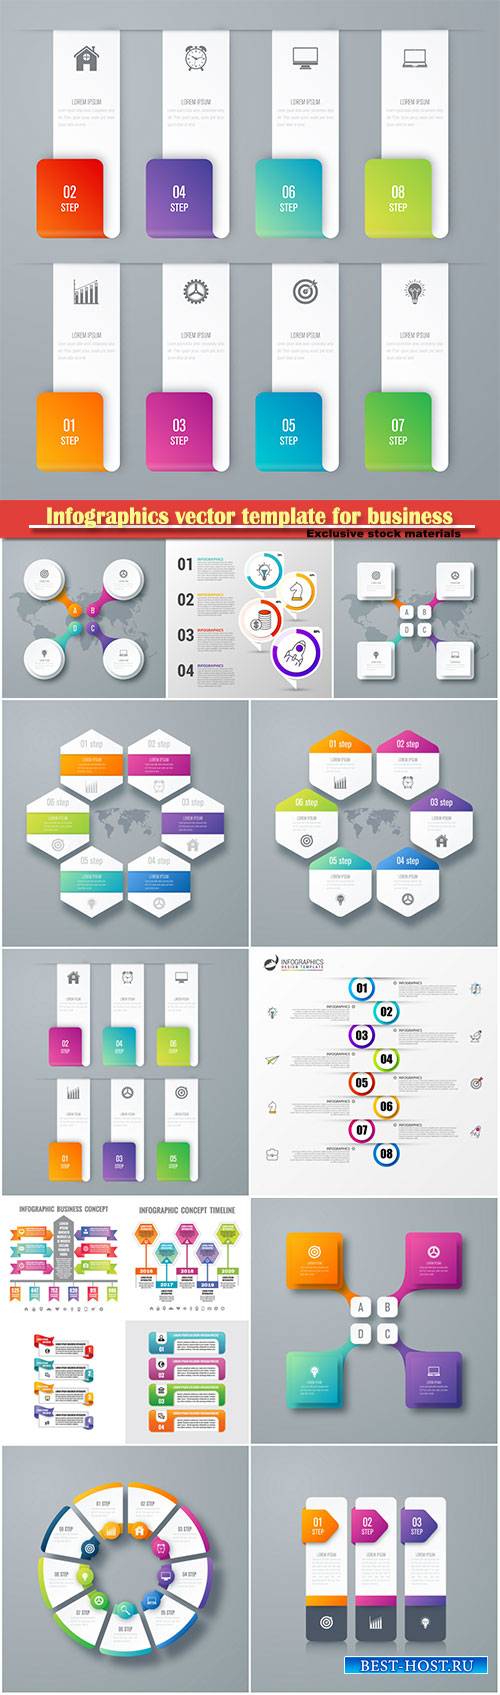 Infographics vector template for business presentations or information banner # 61